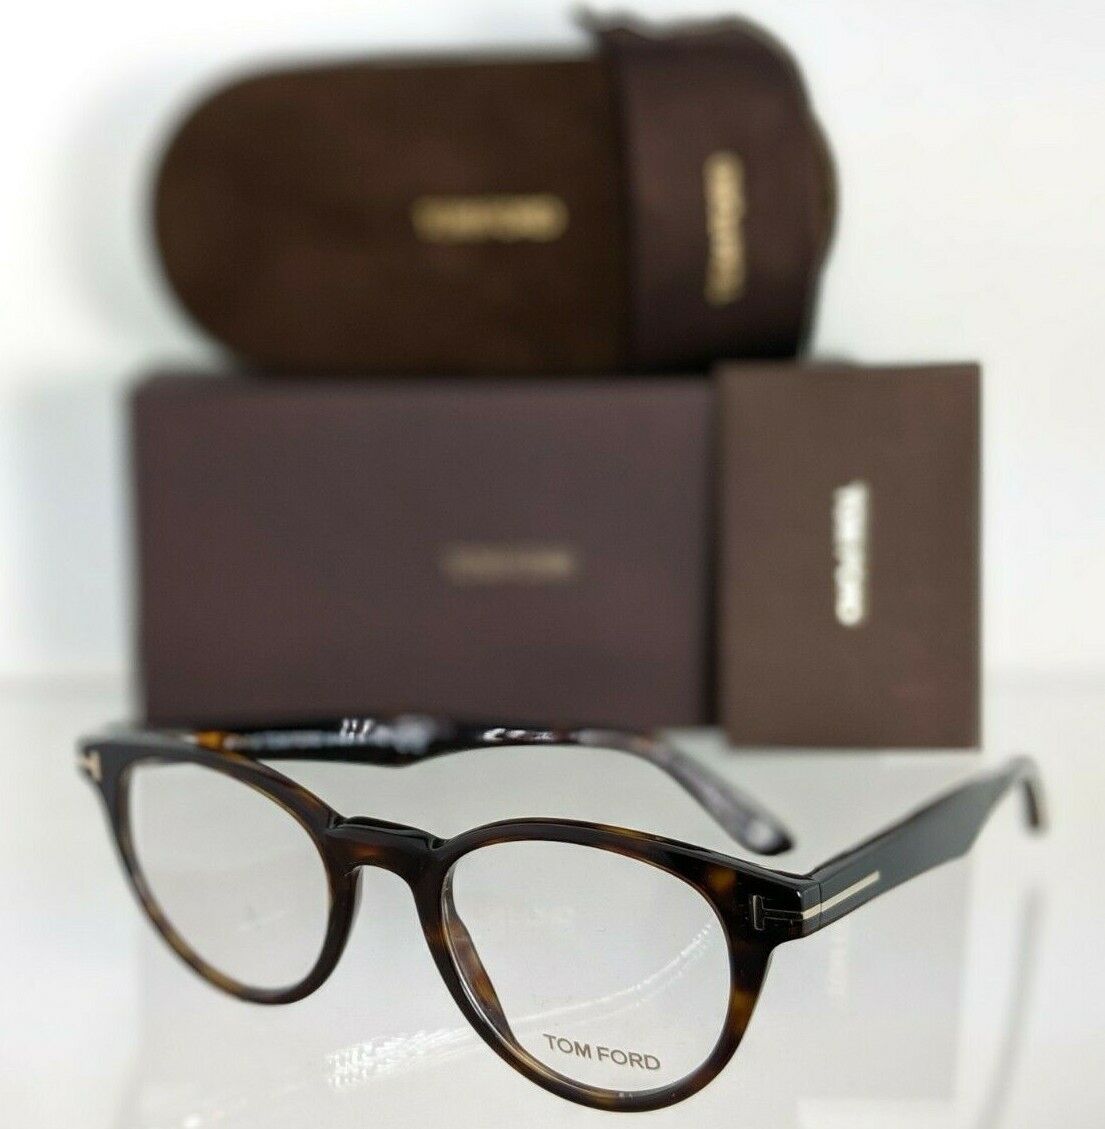 Brand New Authentic Tom Ford Eyeglasses FT TF 5525 052 48mm brown TF5535